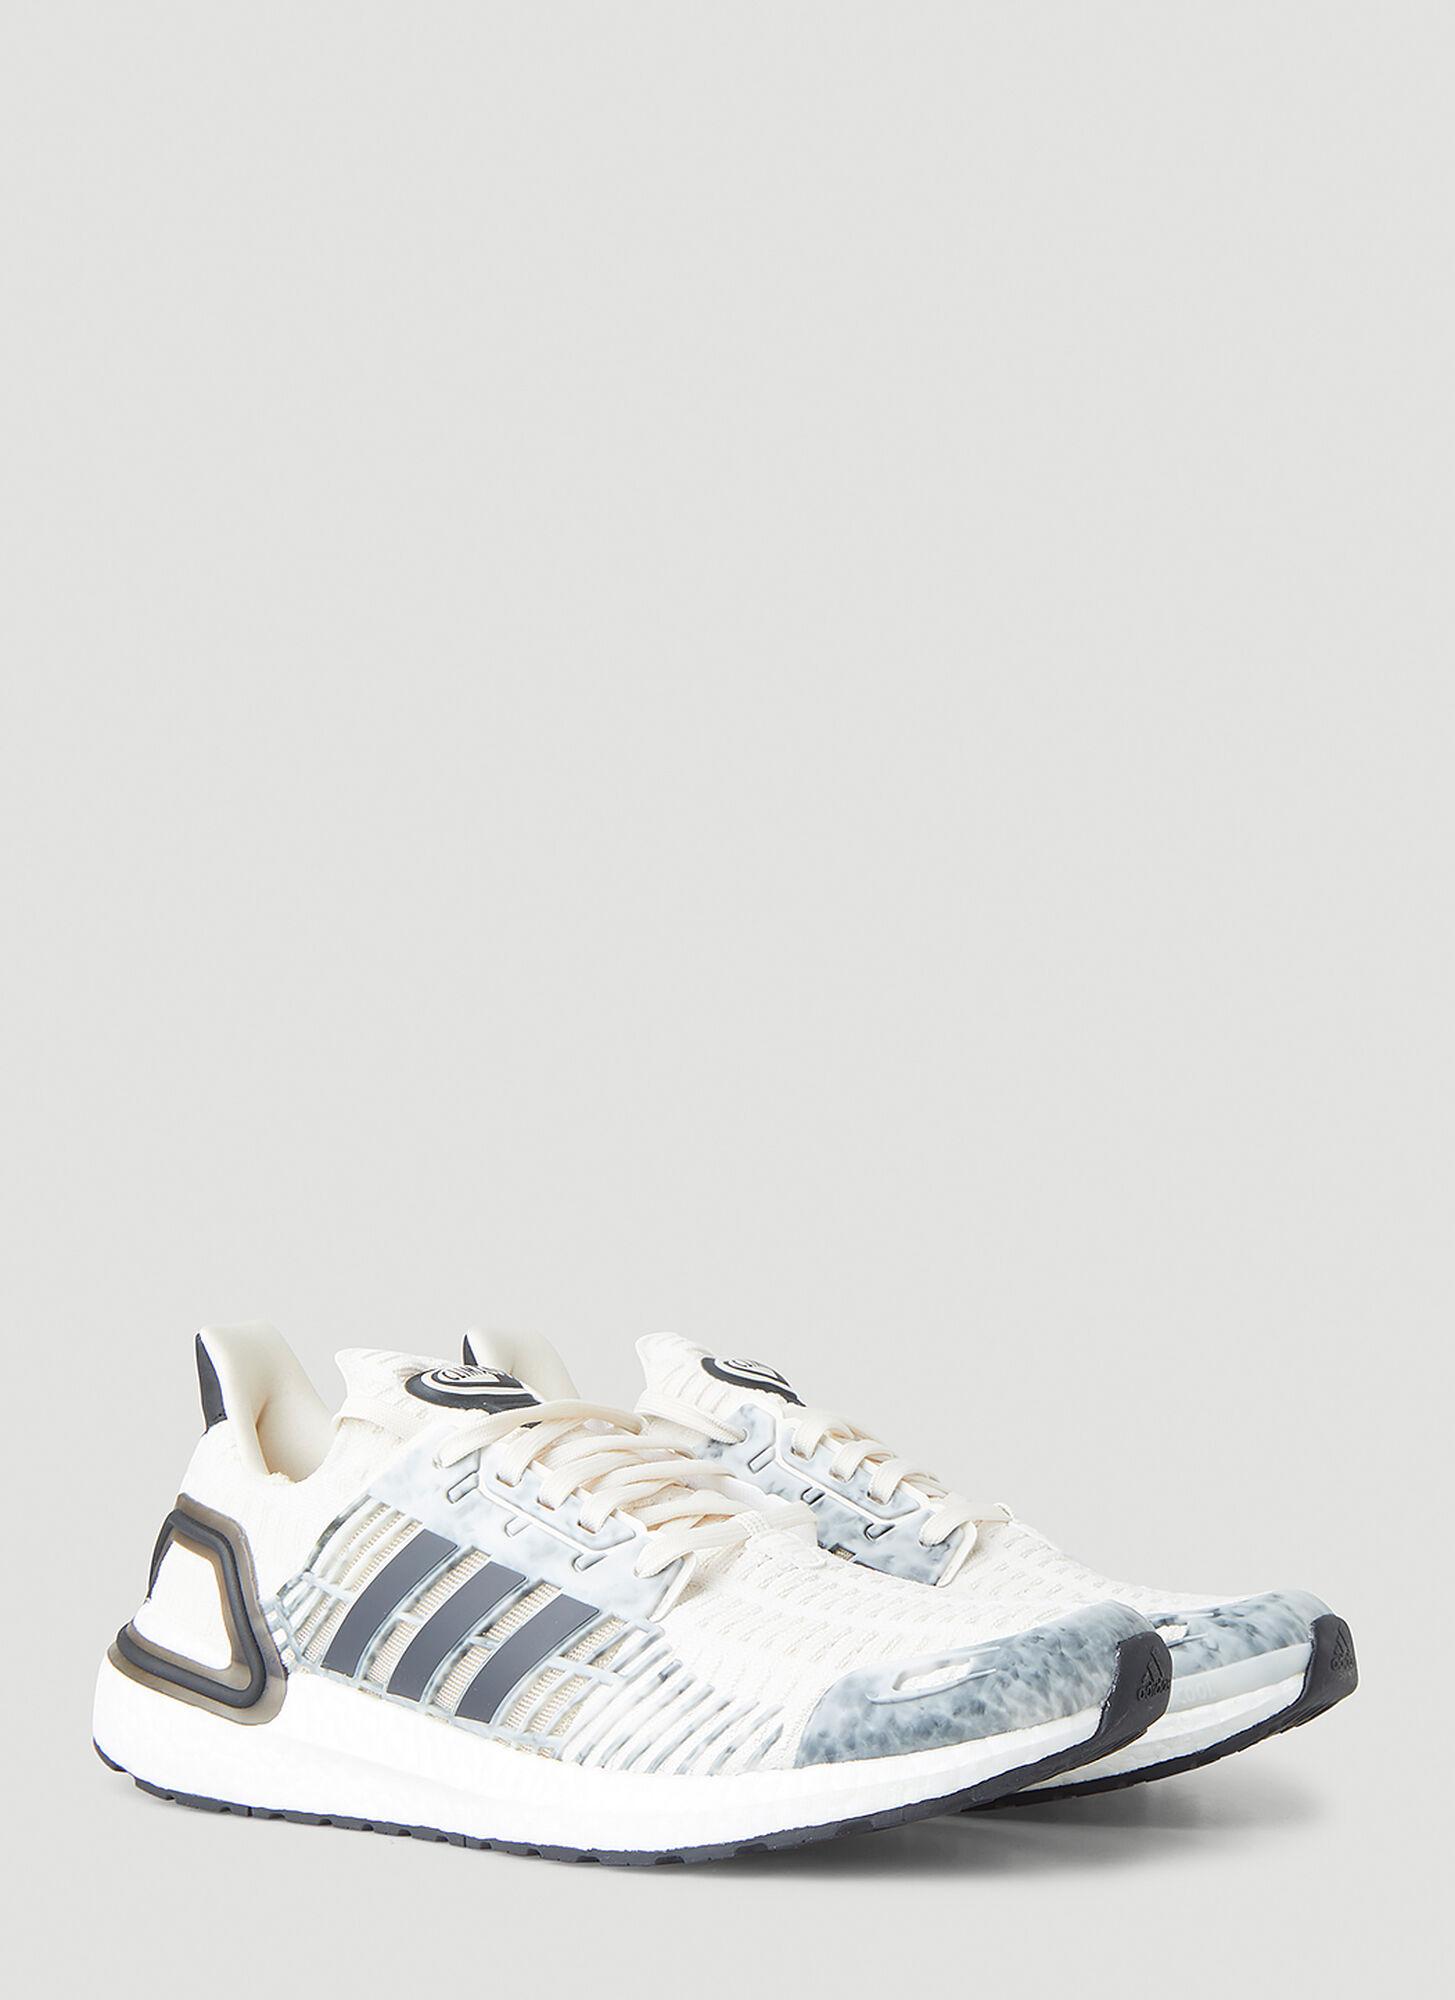 adidas Ultraboost Cc 1 Dna Sneakers White for Men |